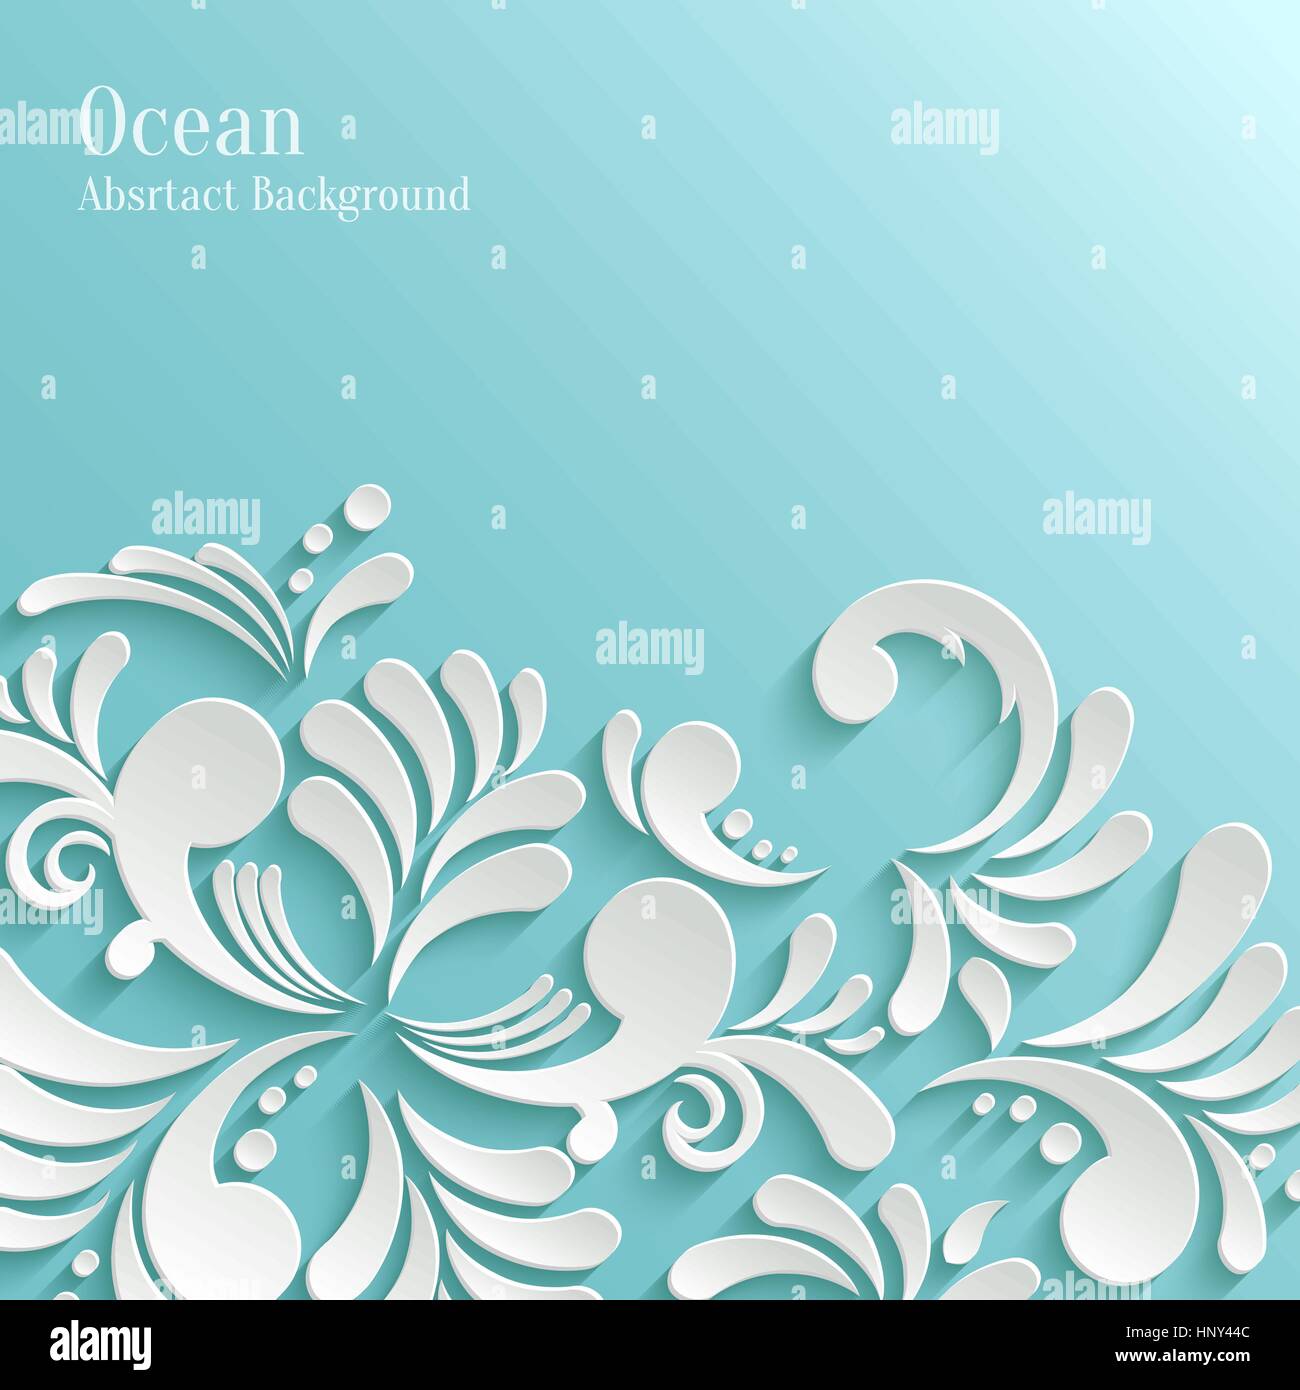 Abstract Ocean Background with 3d Floral Pattern. Trendy Design Template Stock Vector